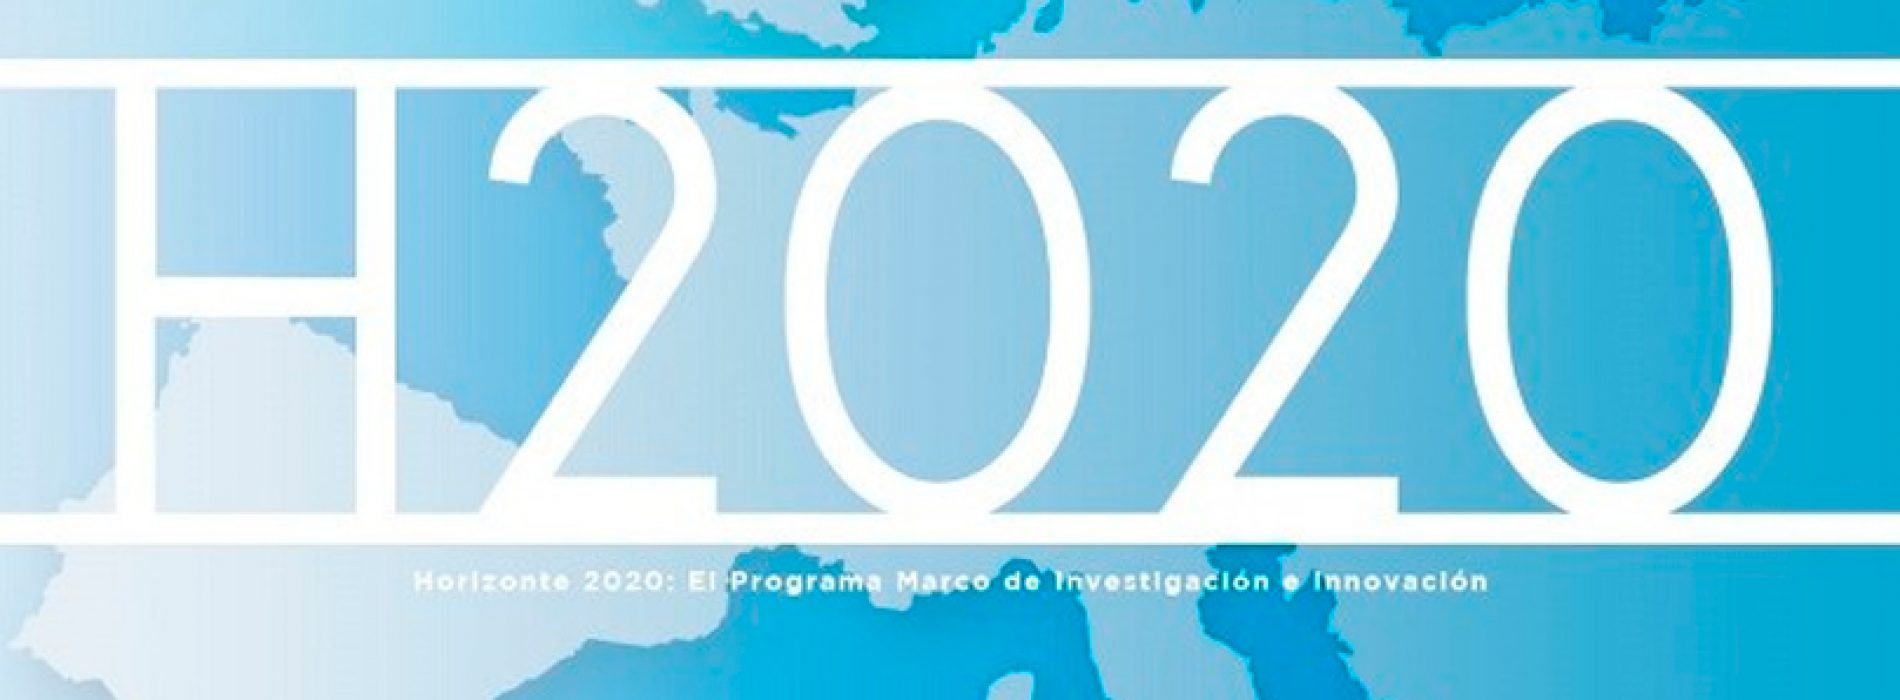 Web-Conference H2020